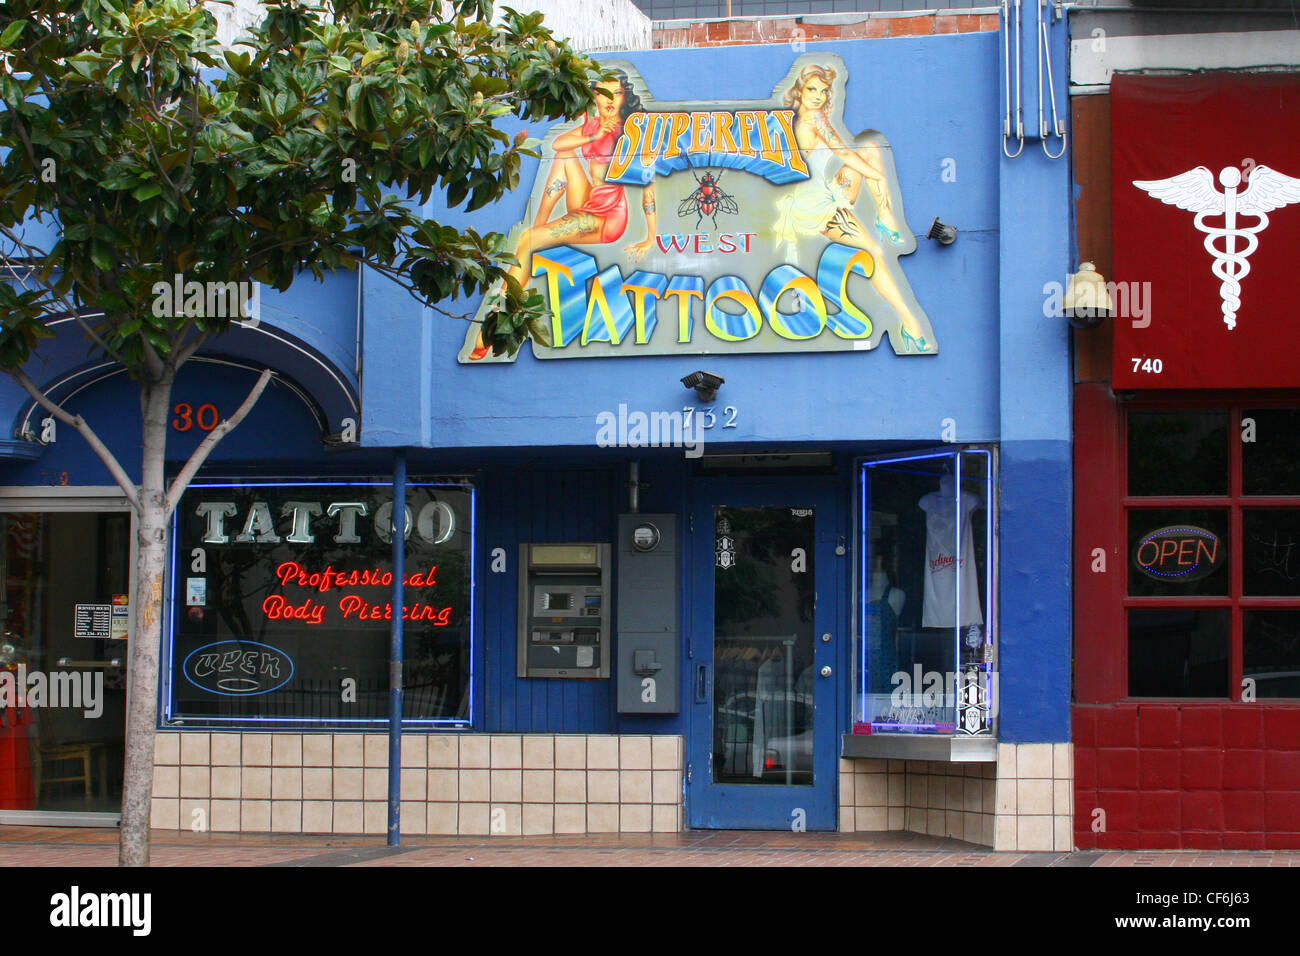 Images of San Diego, California.  Tattoo parlor in Gaslamp Stock Photo